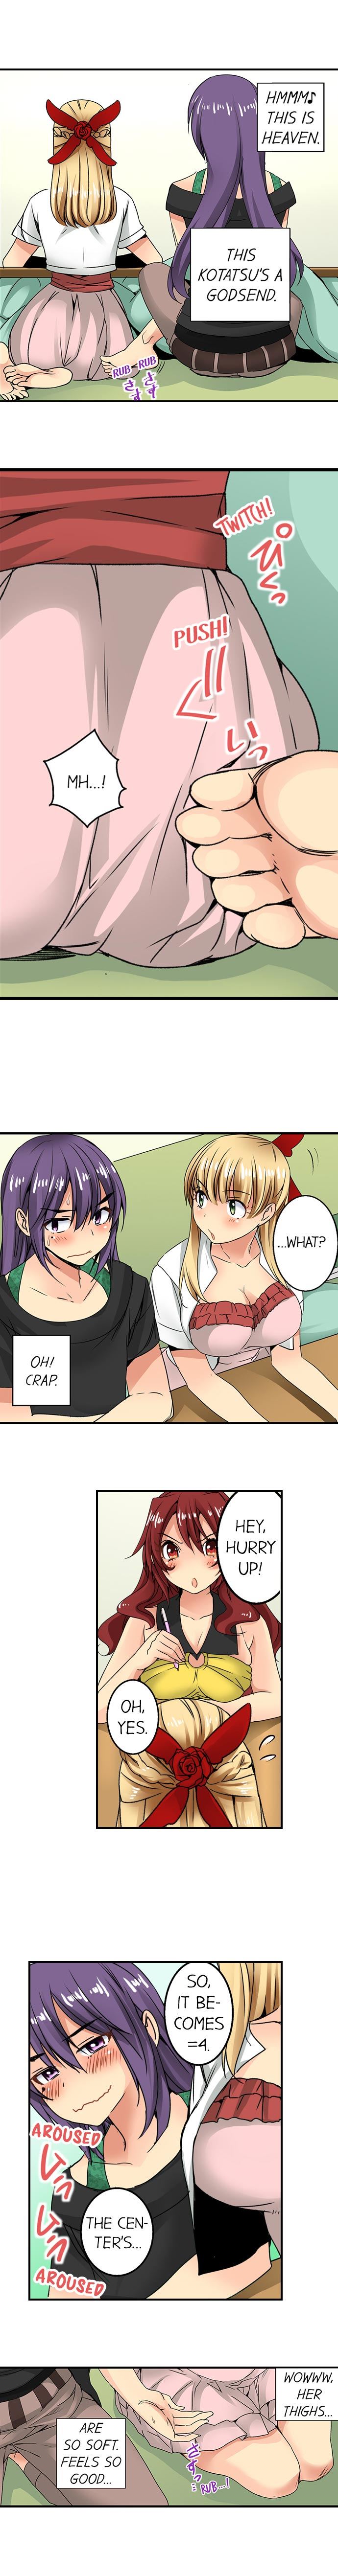 Sneaked Into A Horny Girls’ School - Chapter 17 Page 2